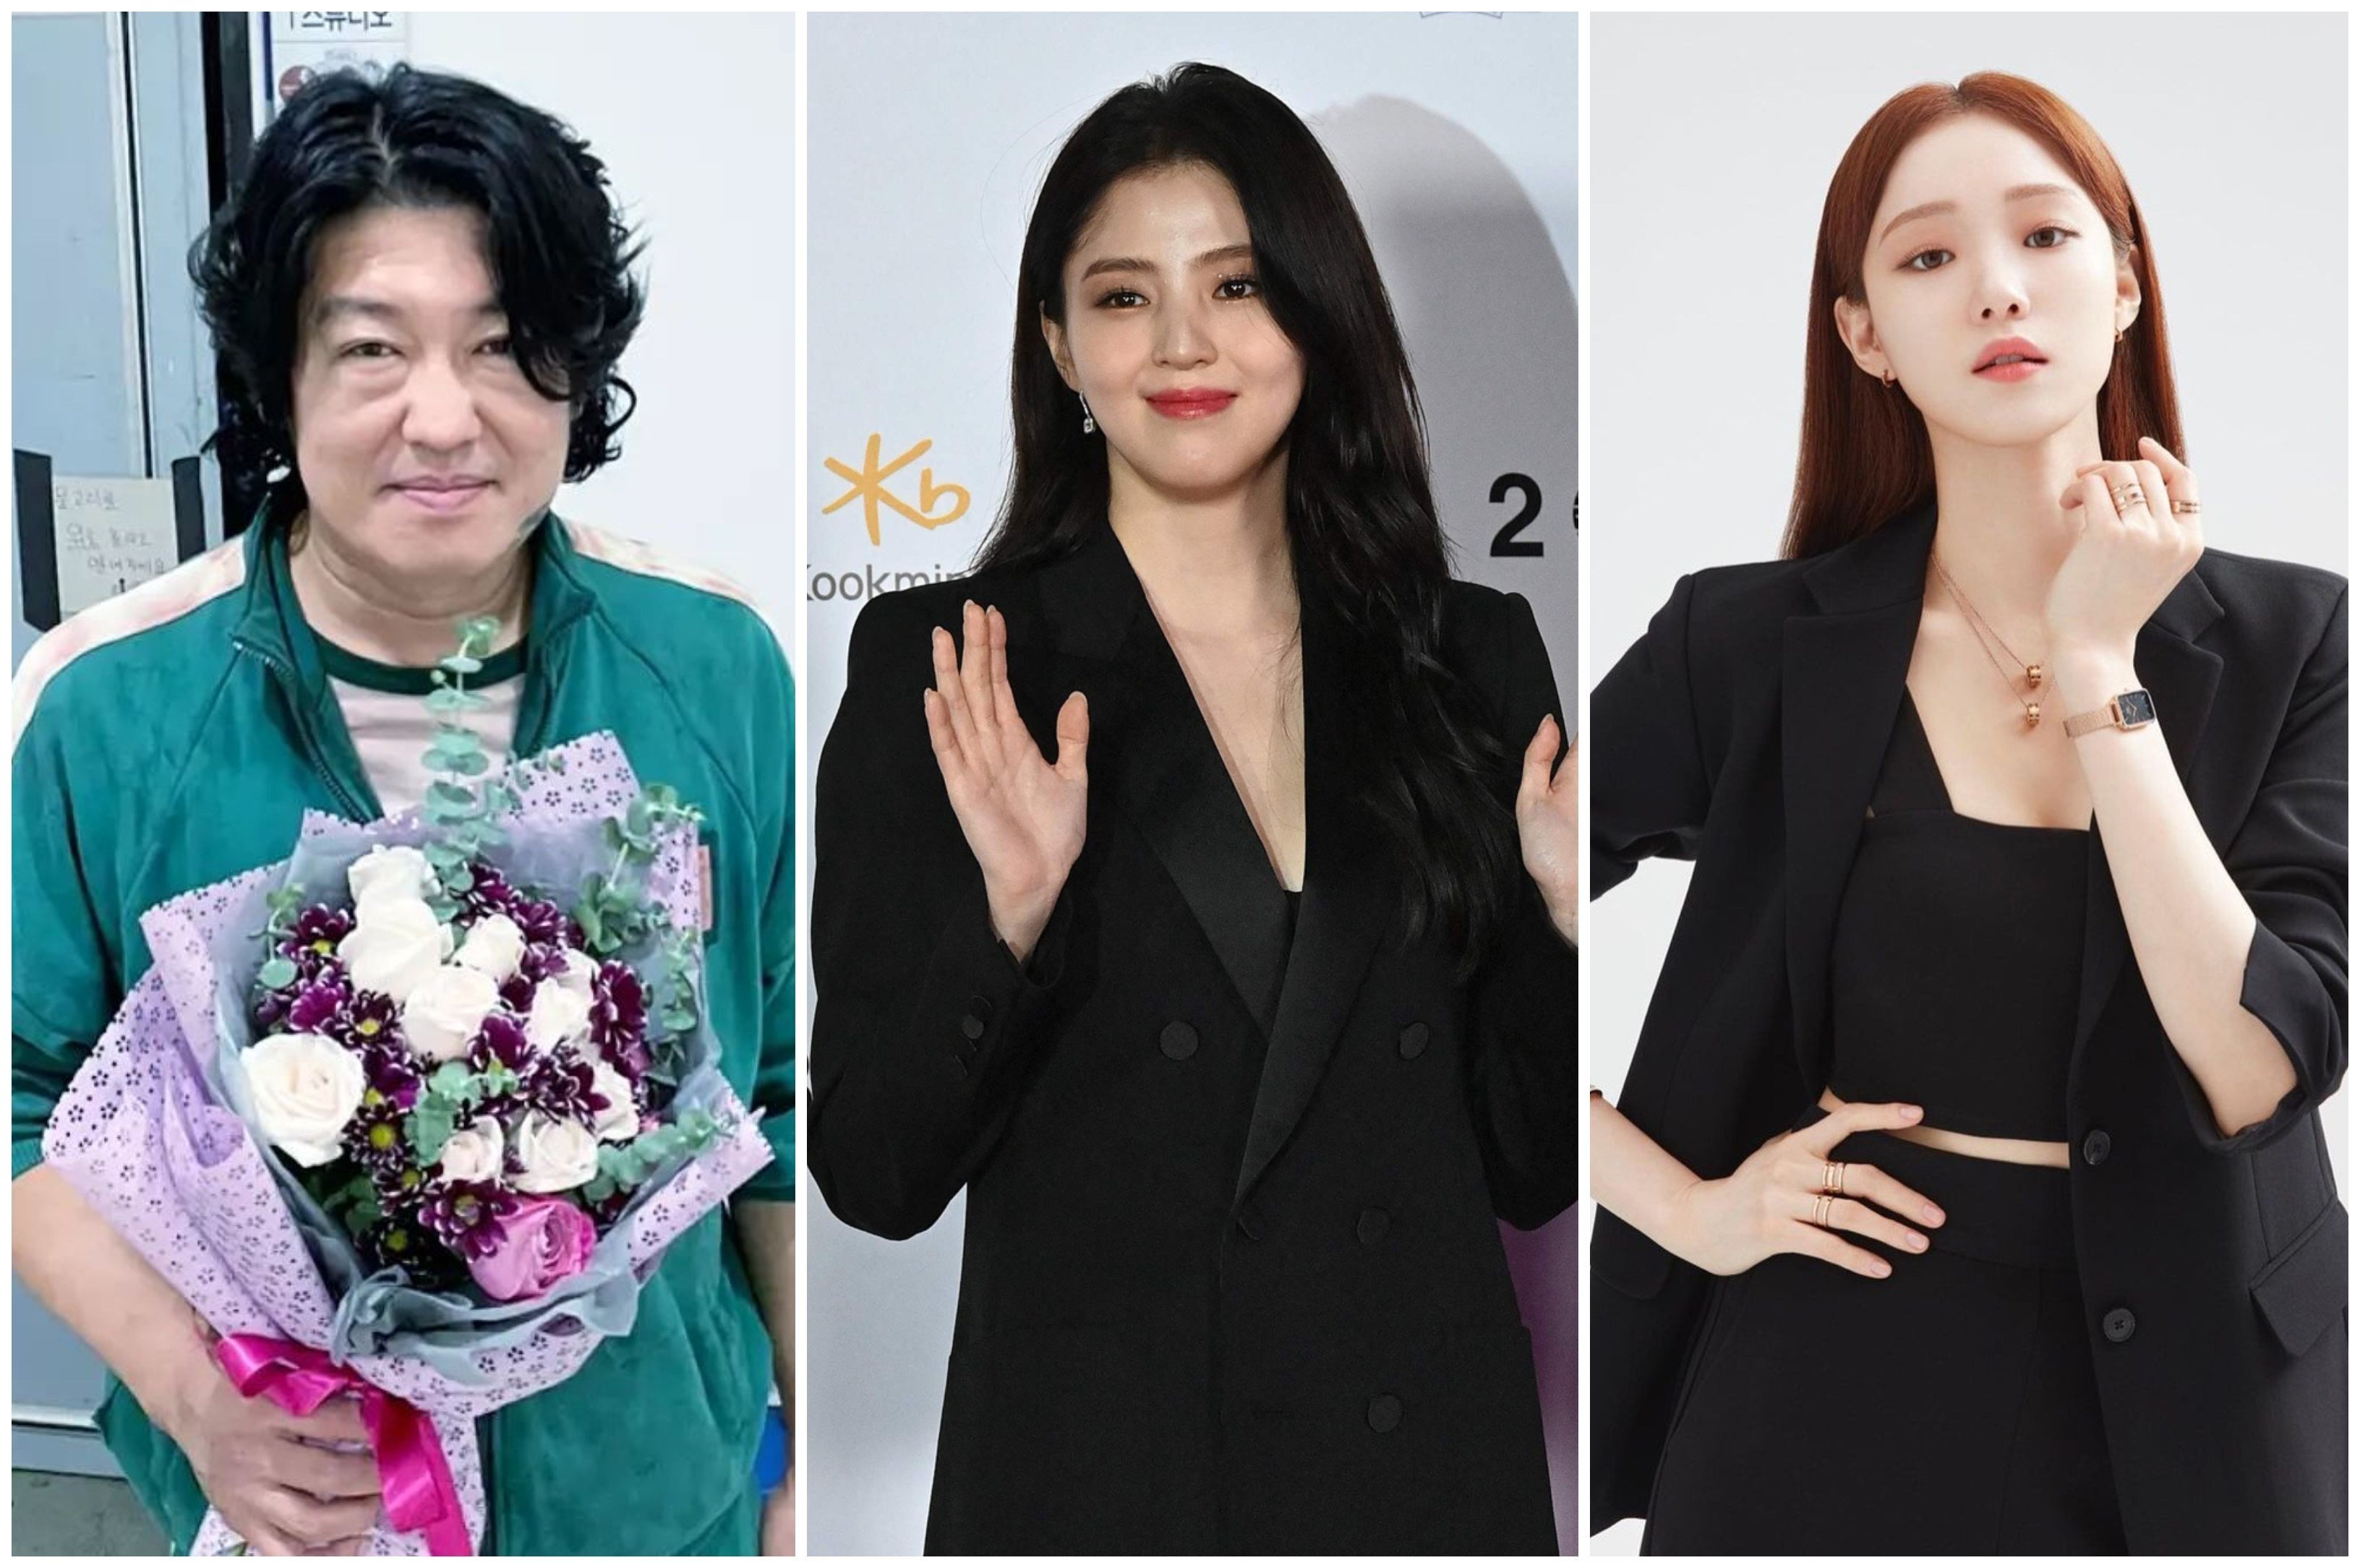 Squid Game’s Heo Sung-tae, My Name’s Han So-hee, and Lee Sung-kyung all gained weight for their respective roles. Photos: @heosungtae, @heybiblee/Instagram; Agence France-Presse